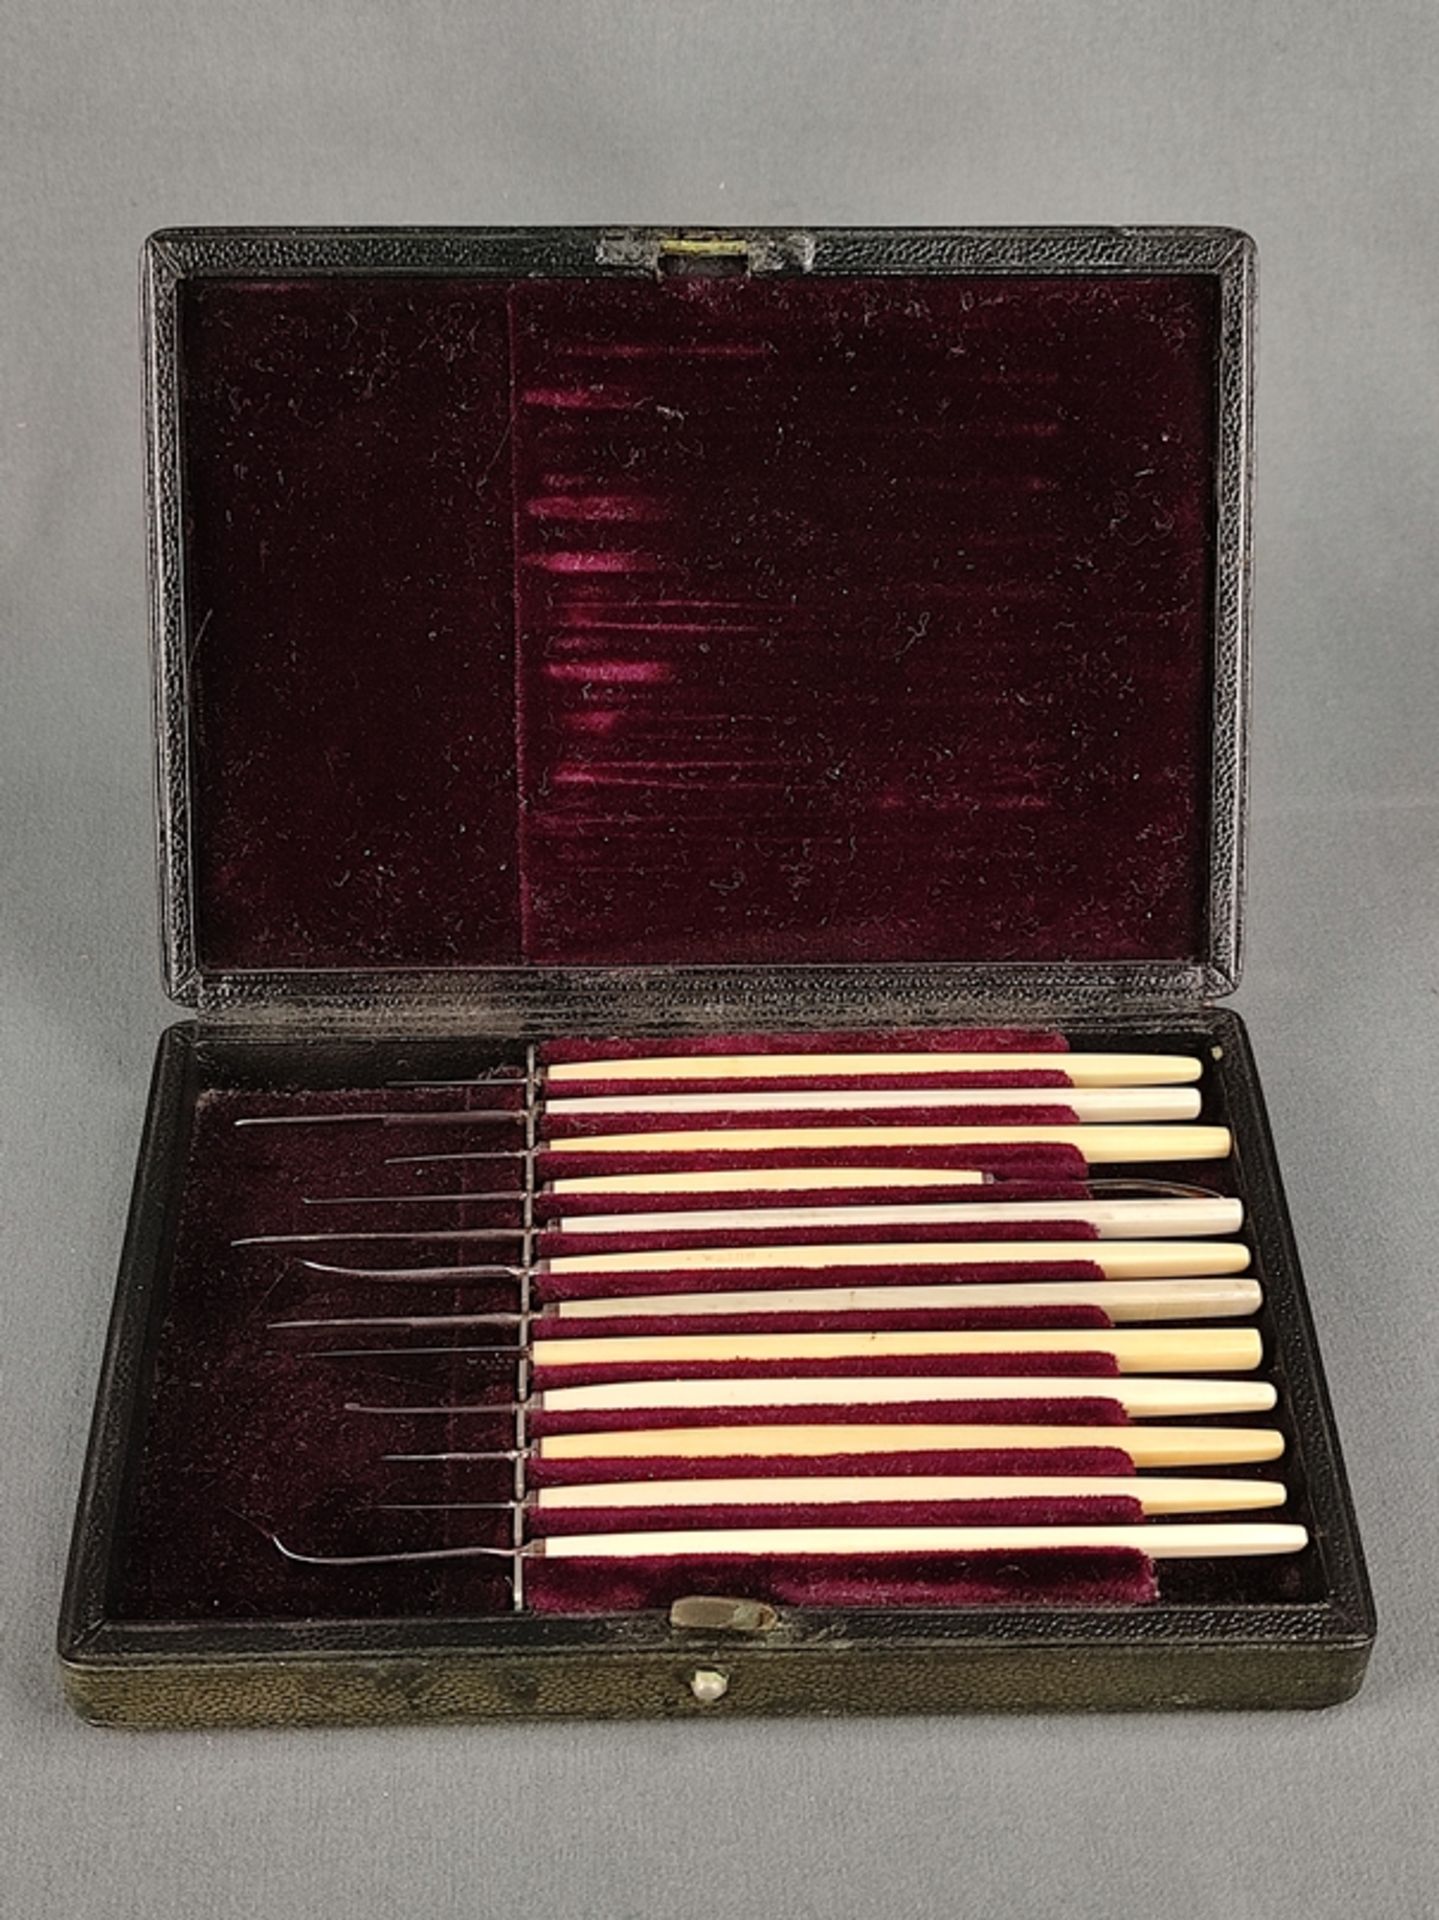 Surgical cutlery, Weiss London, around 1900, 12 pieces, in original case, in very good condition